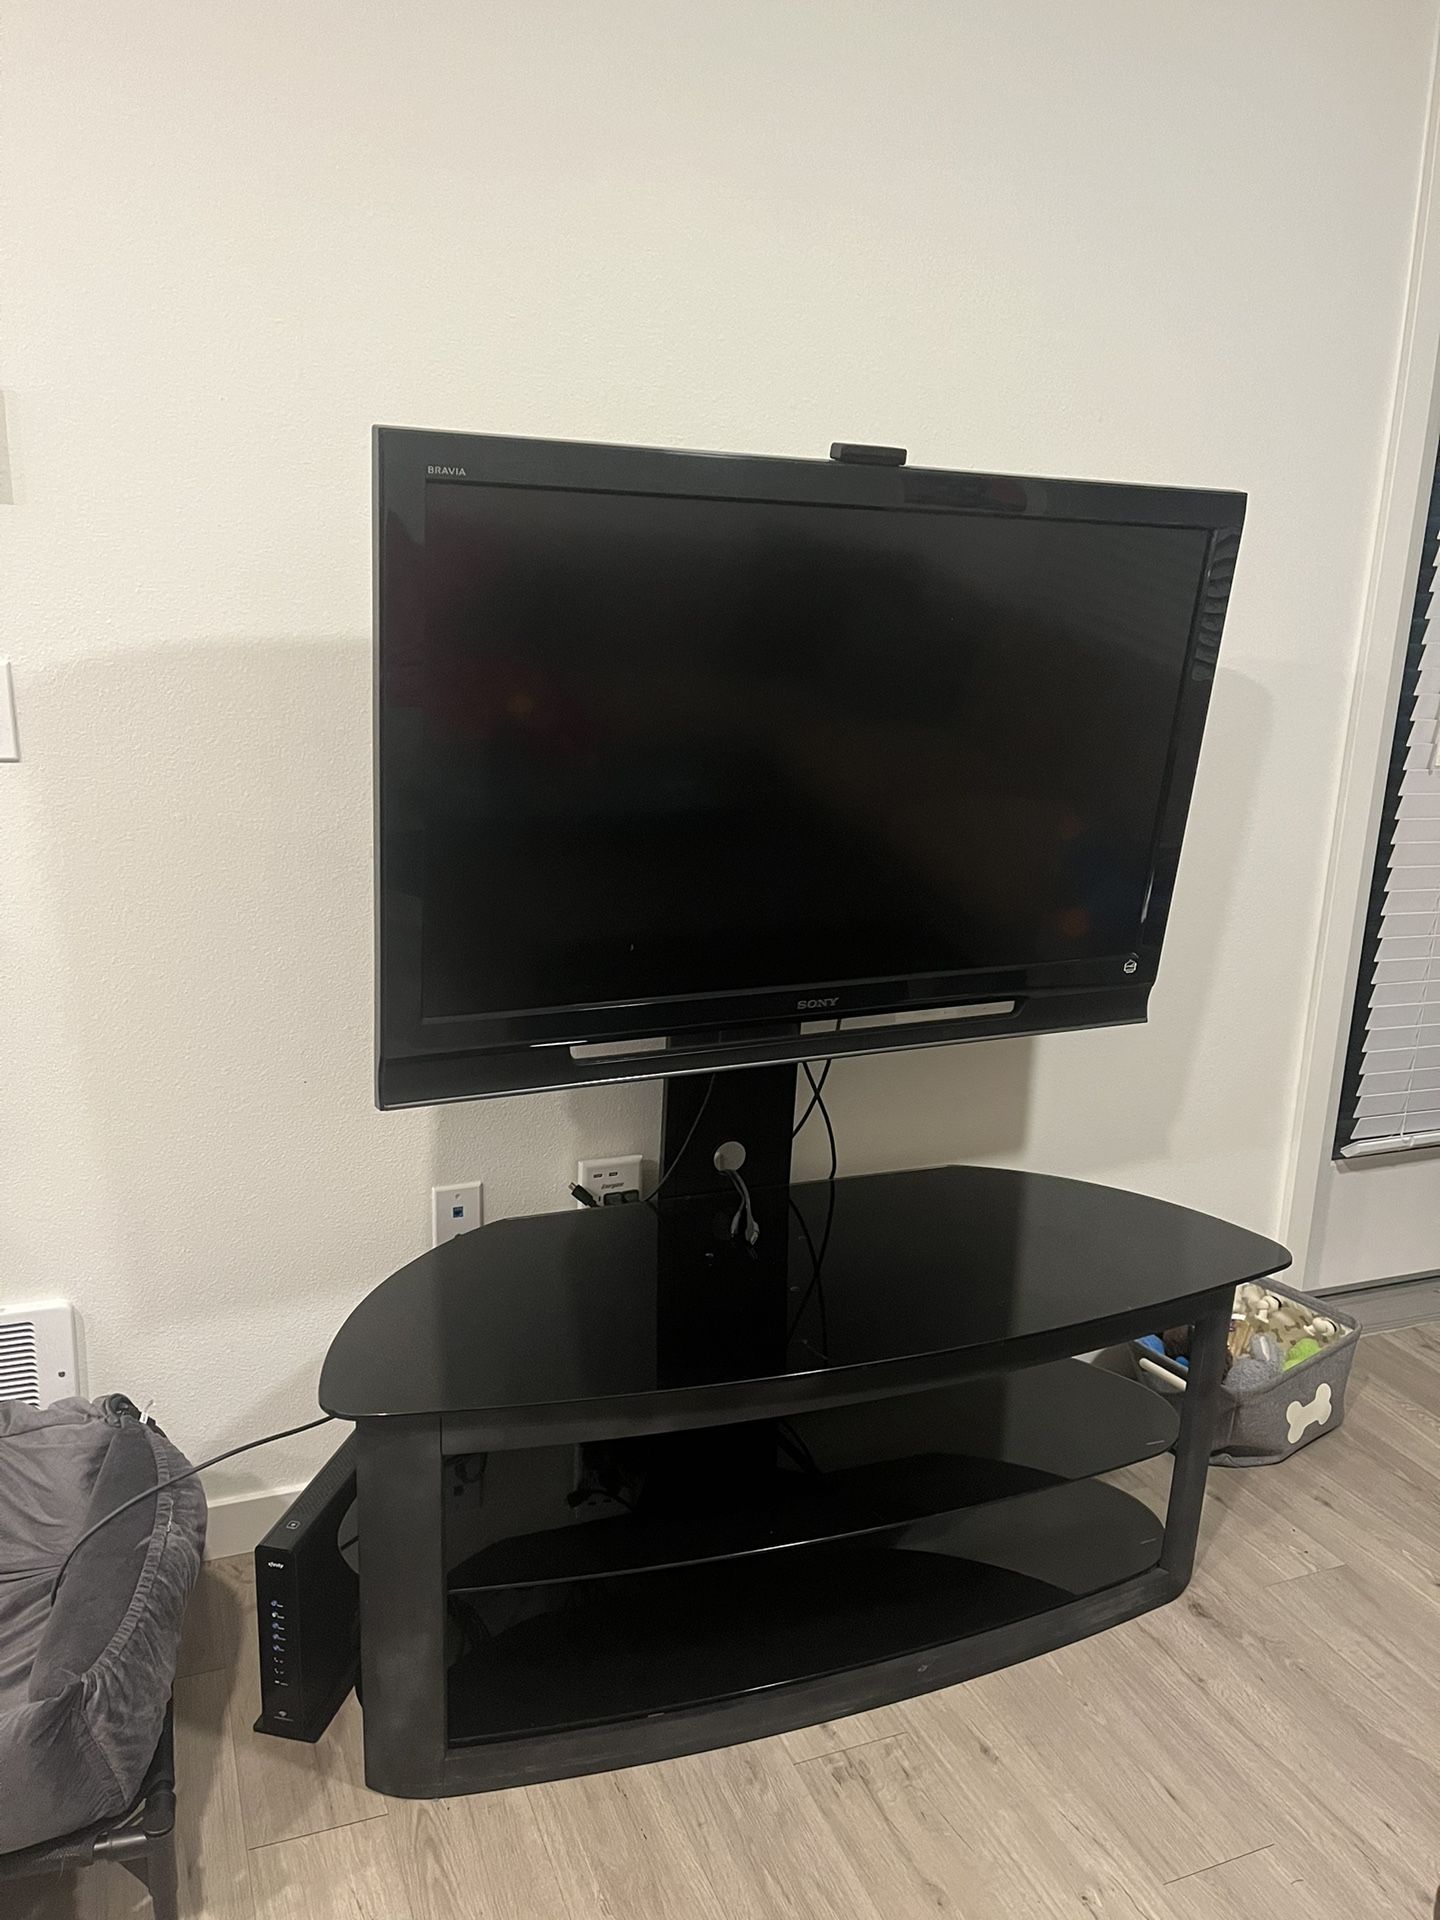 Sony Tv With Tv Stand